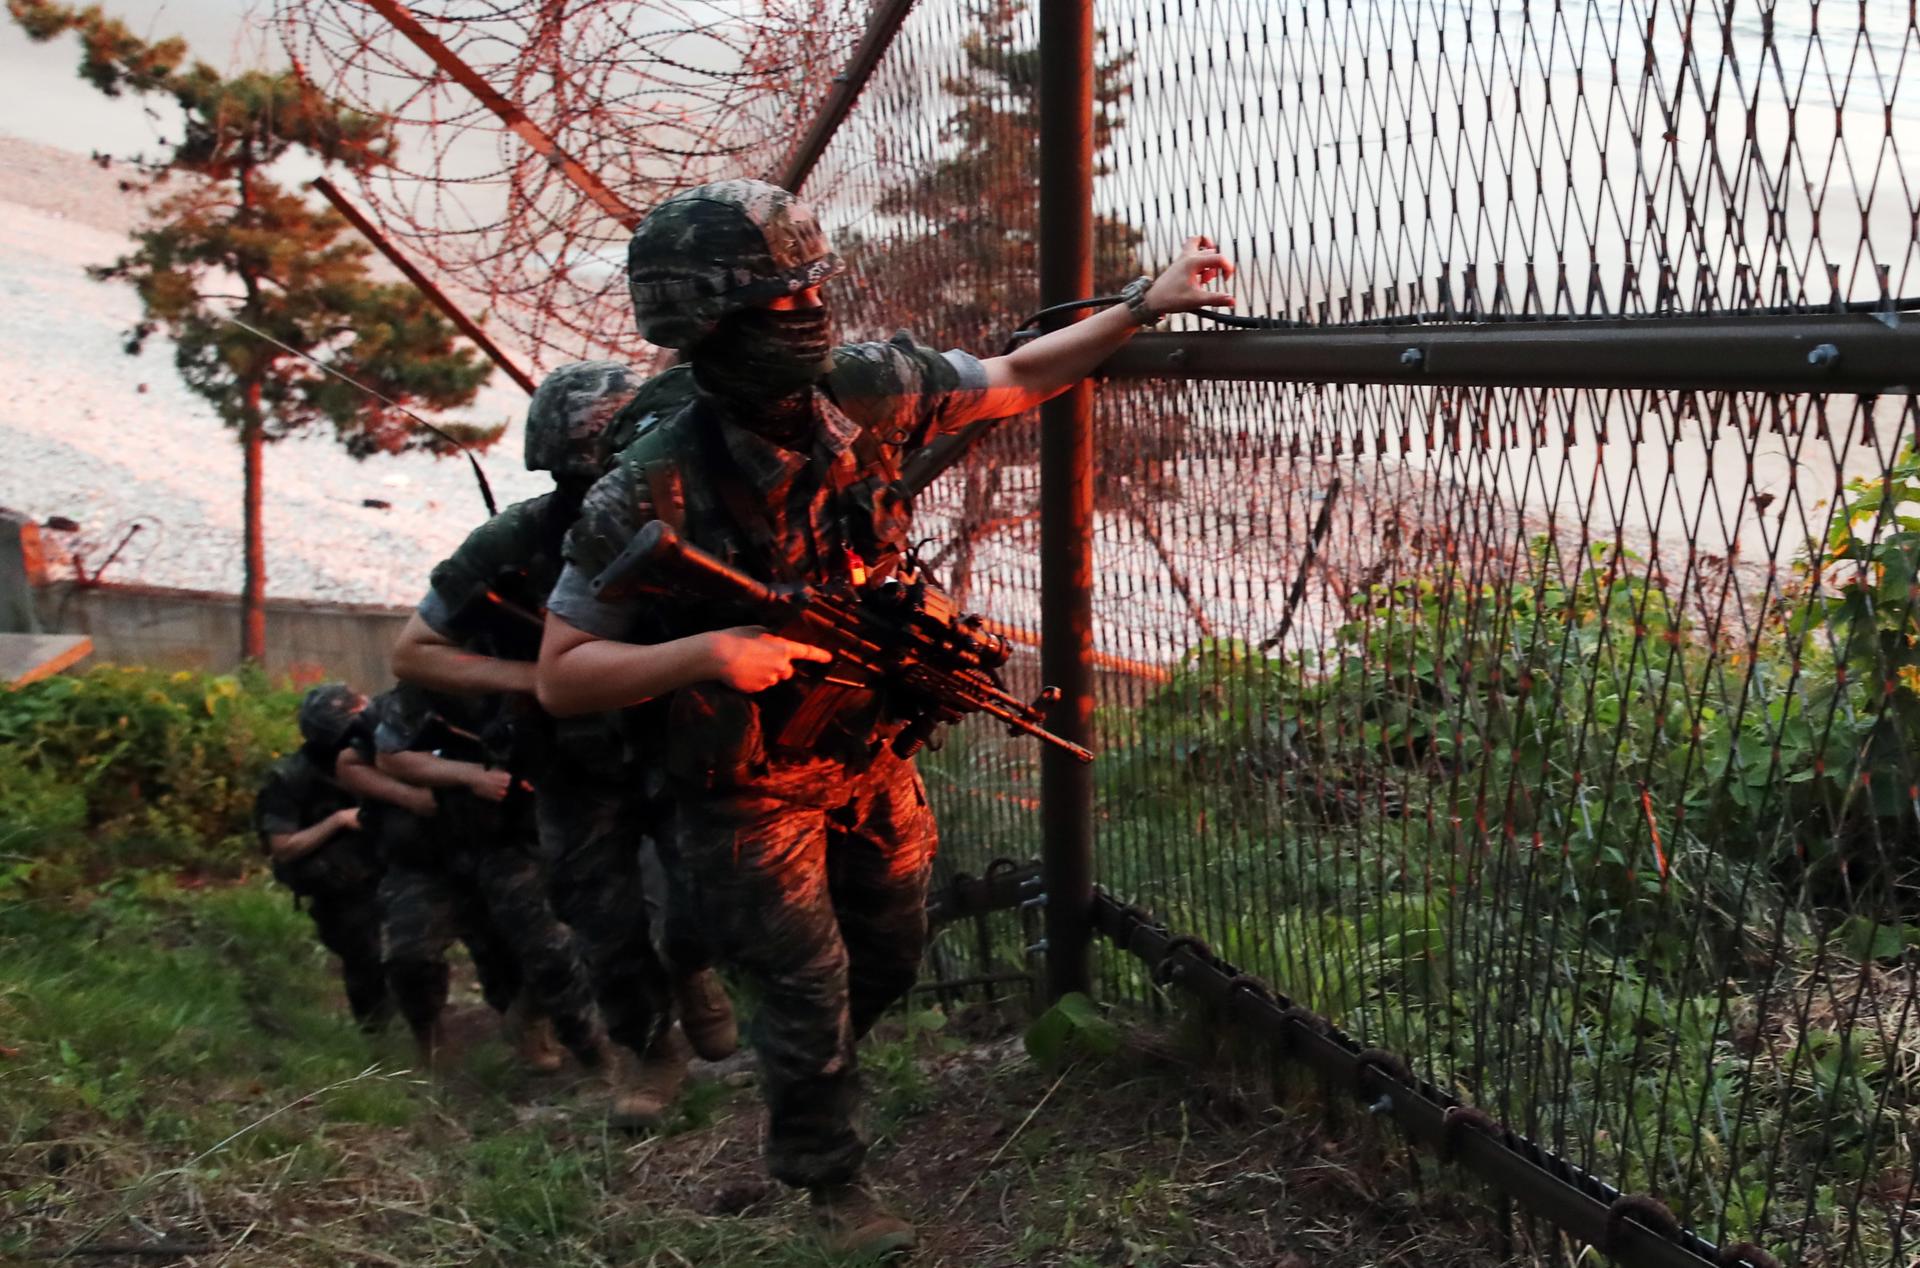 South Korean Marines patrol a perimeter fence of Yeonpyeong Island just south of the Northern Limit Line of the inter-Korean maritime border, in South Korea, 16 June 2020. EFE-EPA FILE/YONHAP SOUTH KOREA OUT[SOUTH KOREA OUT]